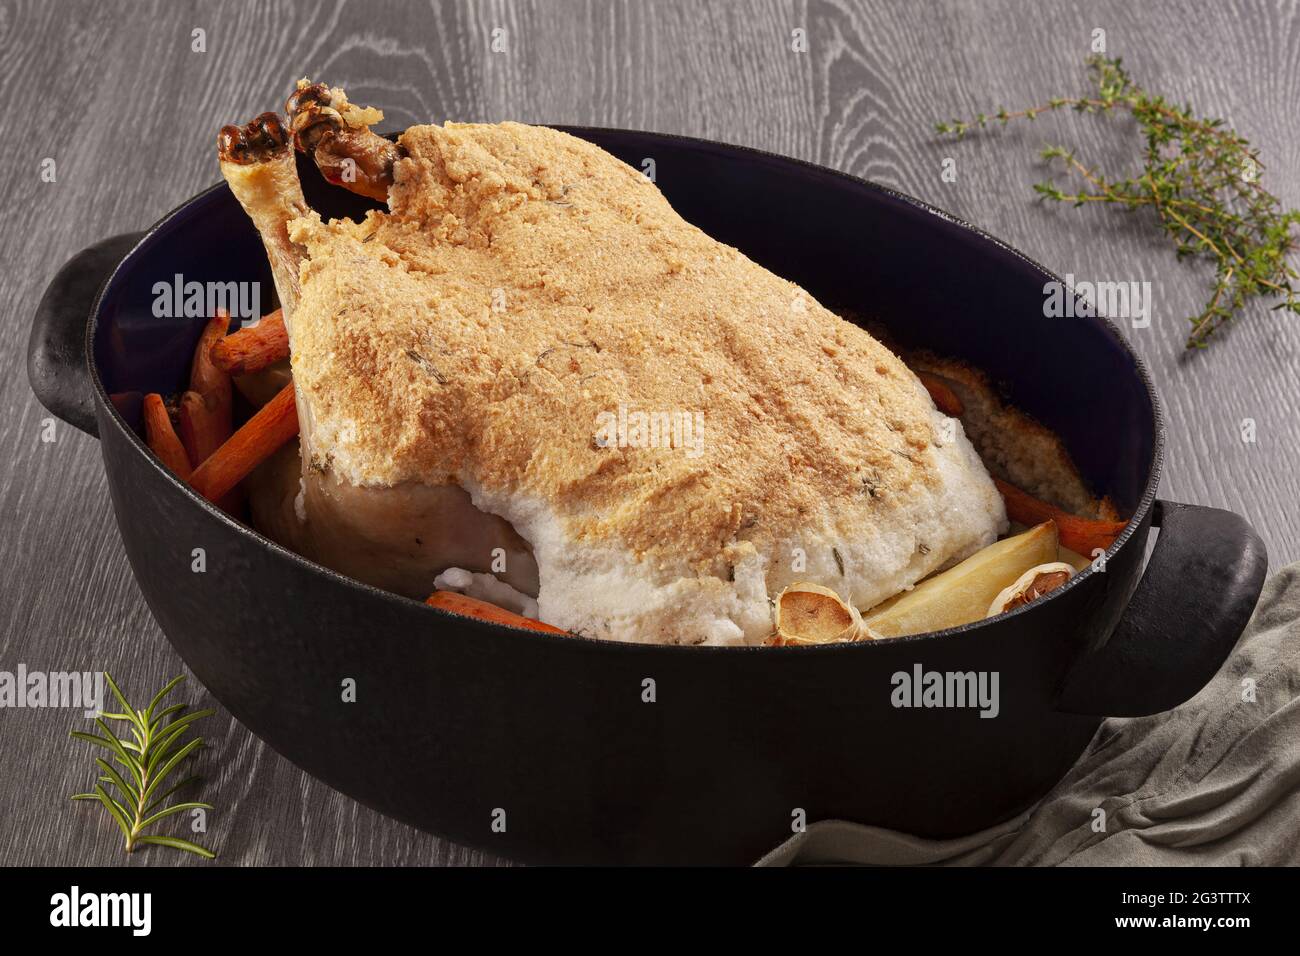 Salt crusted chicken with vegetable. Stock Photo